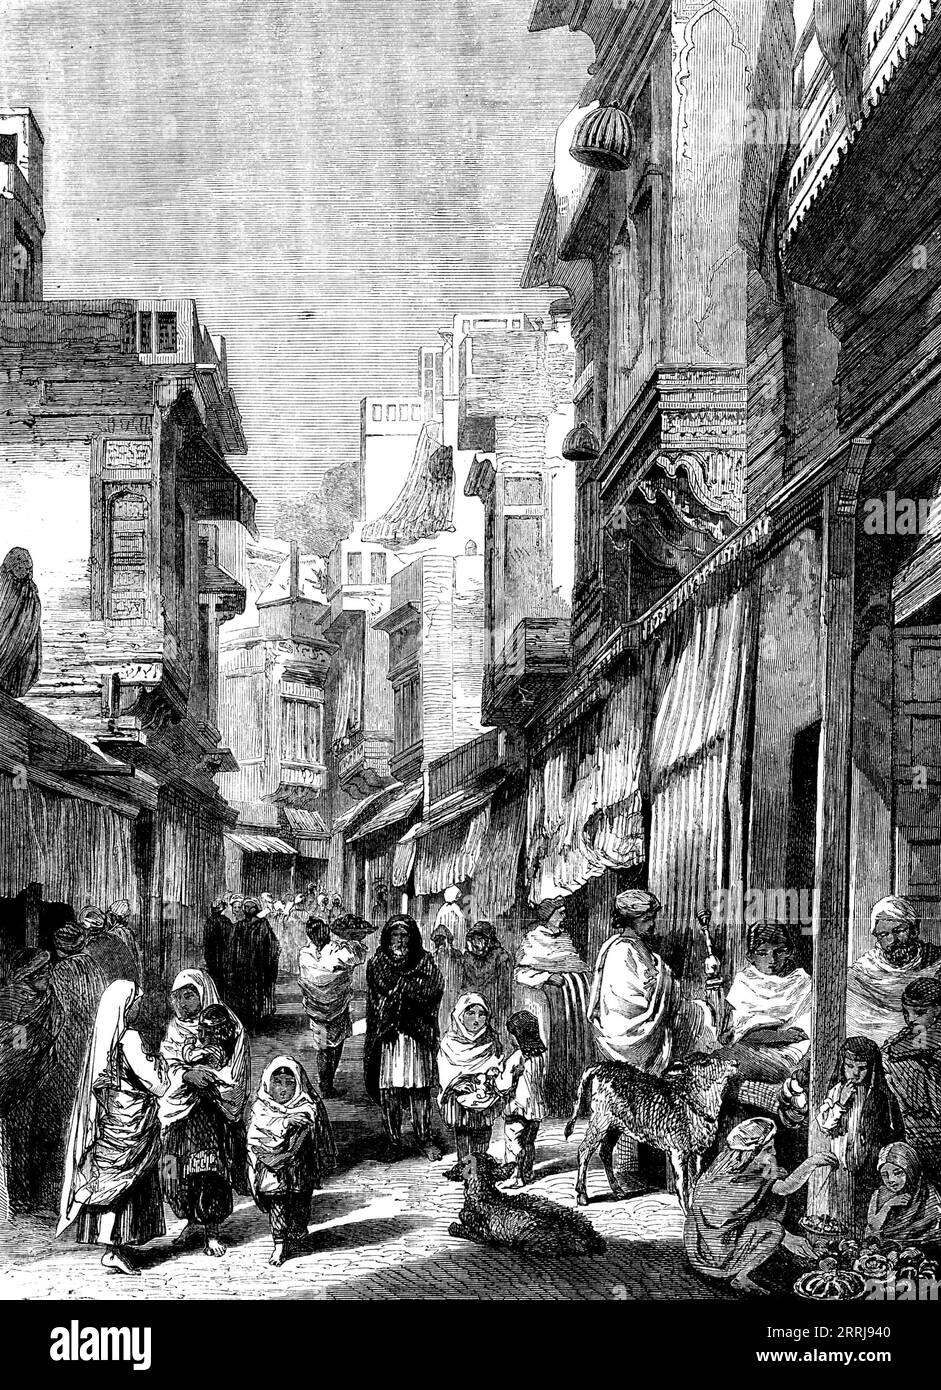 Street Scene in Lahore - from drawings by W. Carpenter, Jun., 1858. '...the capital of the Punjaub...is on the highroad from Central Asia to the rich plains of India, which have been, the desire of every Moslem conqueror...Its brightest time was, perhaps, that when Jehangir made it his winter quarters on returning from Cashmere; and almost the only buildings of importance now remaining date from that period. But its present aspect was given to it during the sovereignty of Runjeet Singh, who built the walls and ditch (about four miles round), together with the fortified palace; and here he and Stock Photo